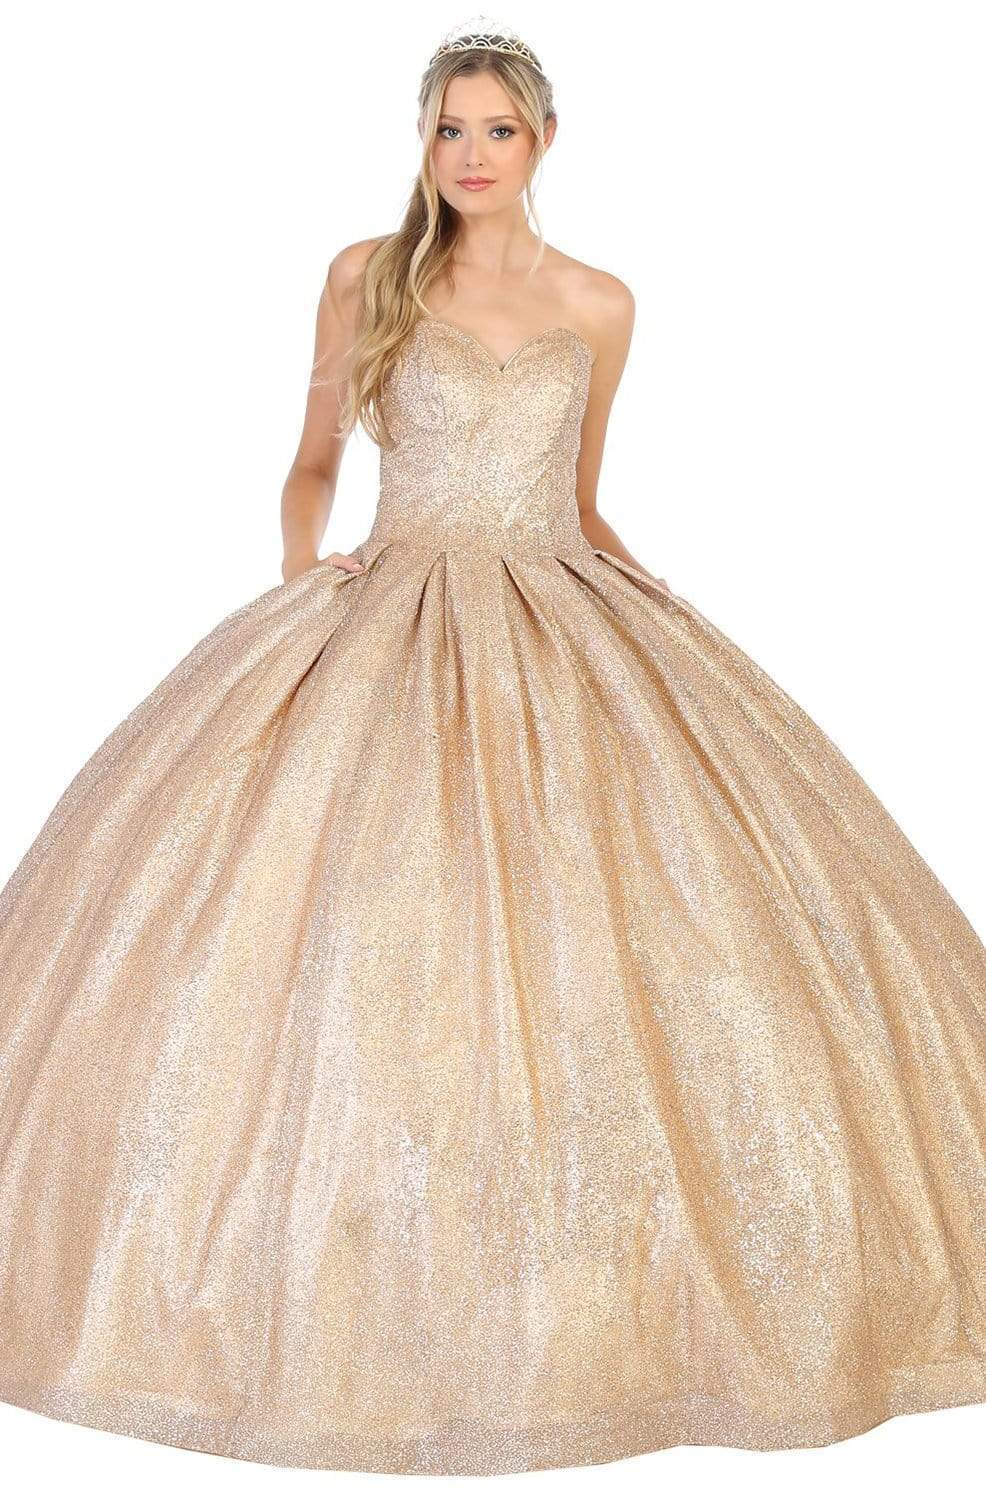 May Queen - LK138 Strapless Sweetheart Pleated Ballgown
